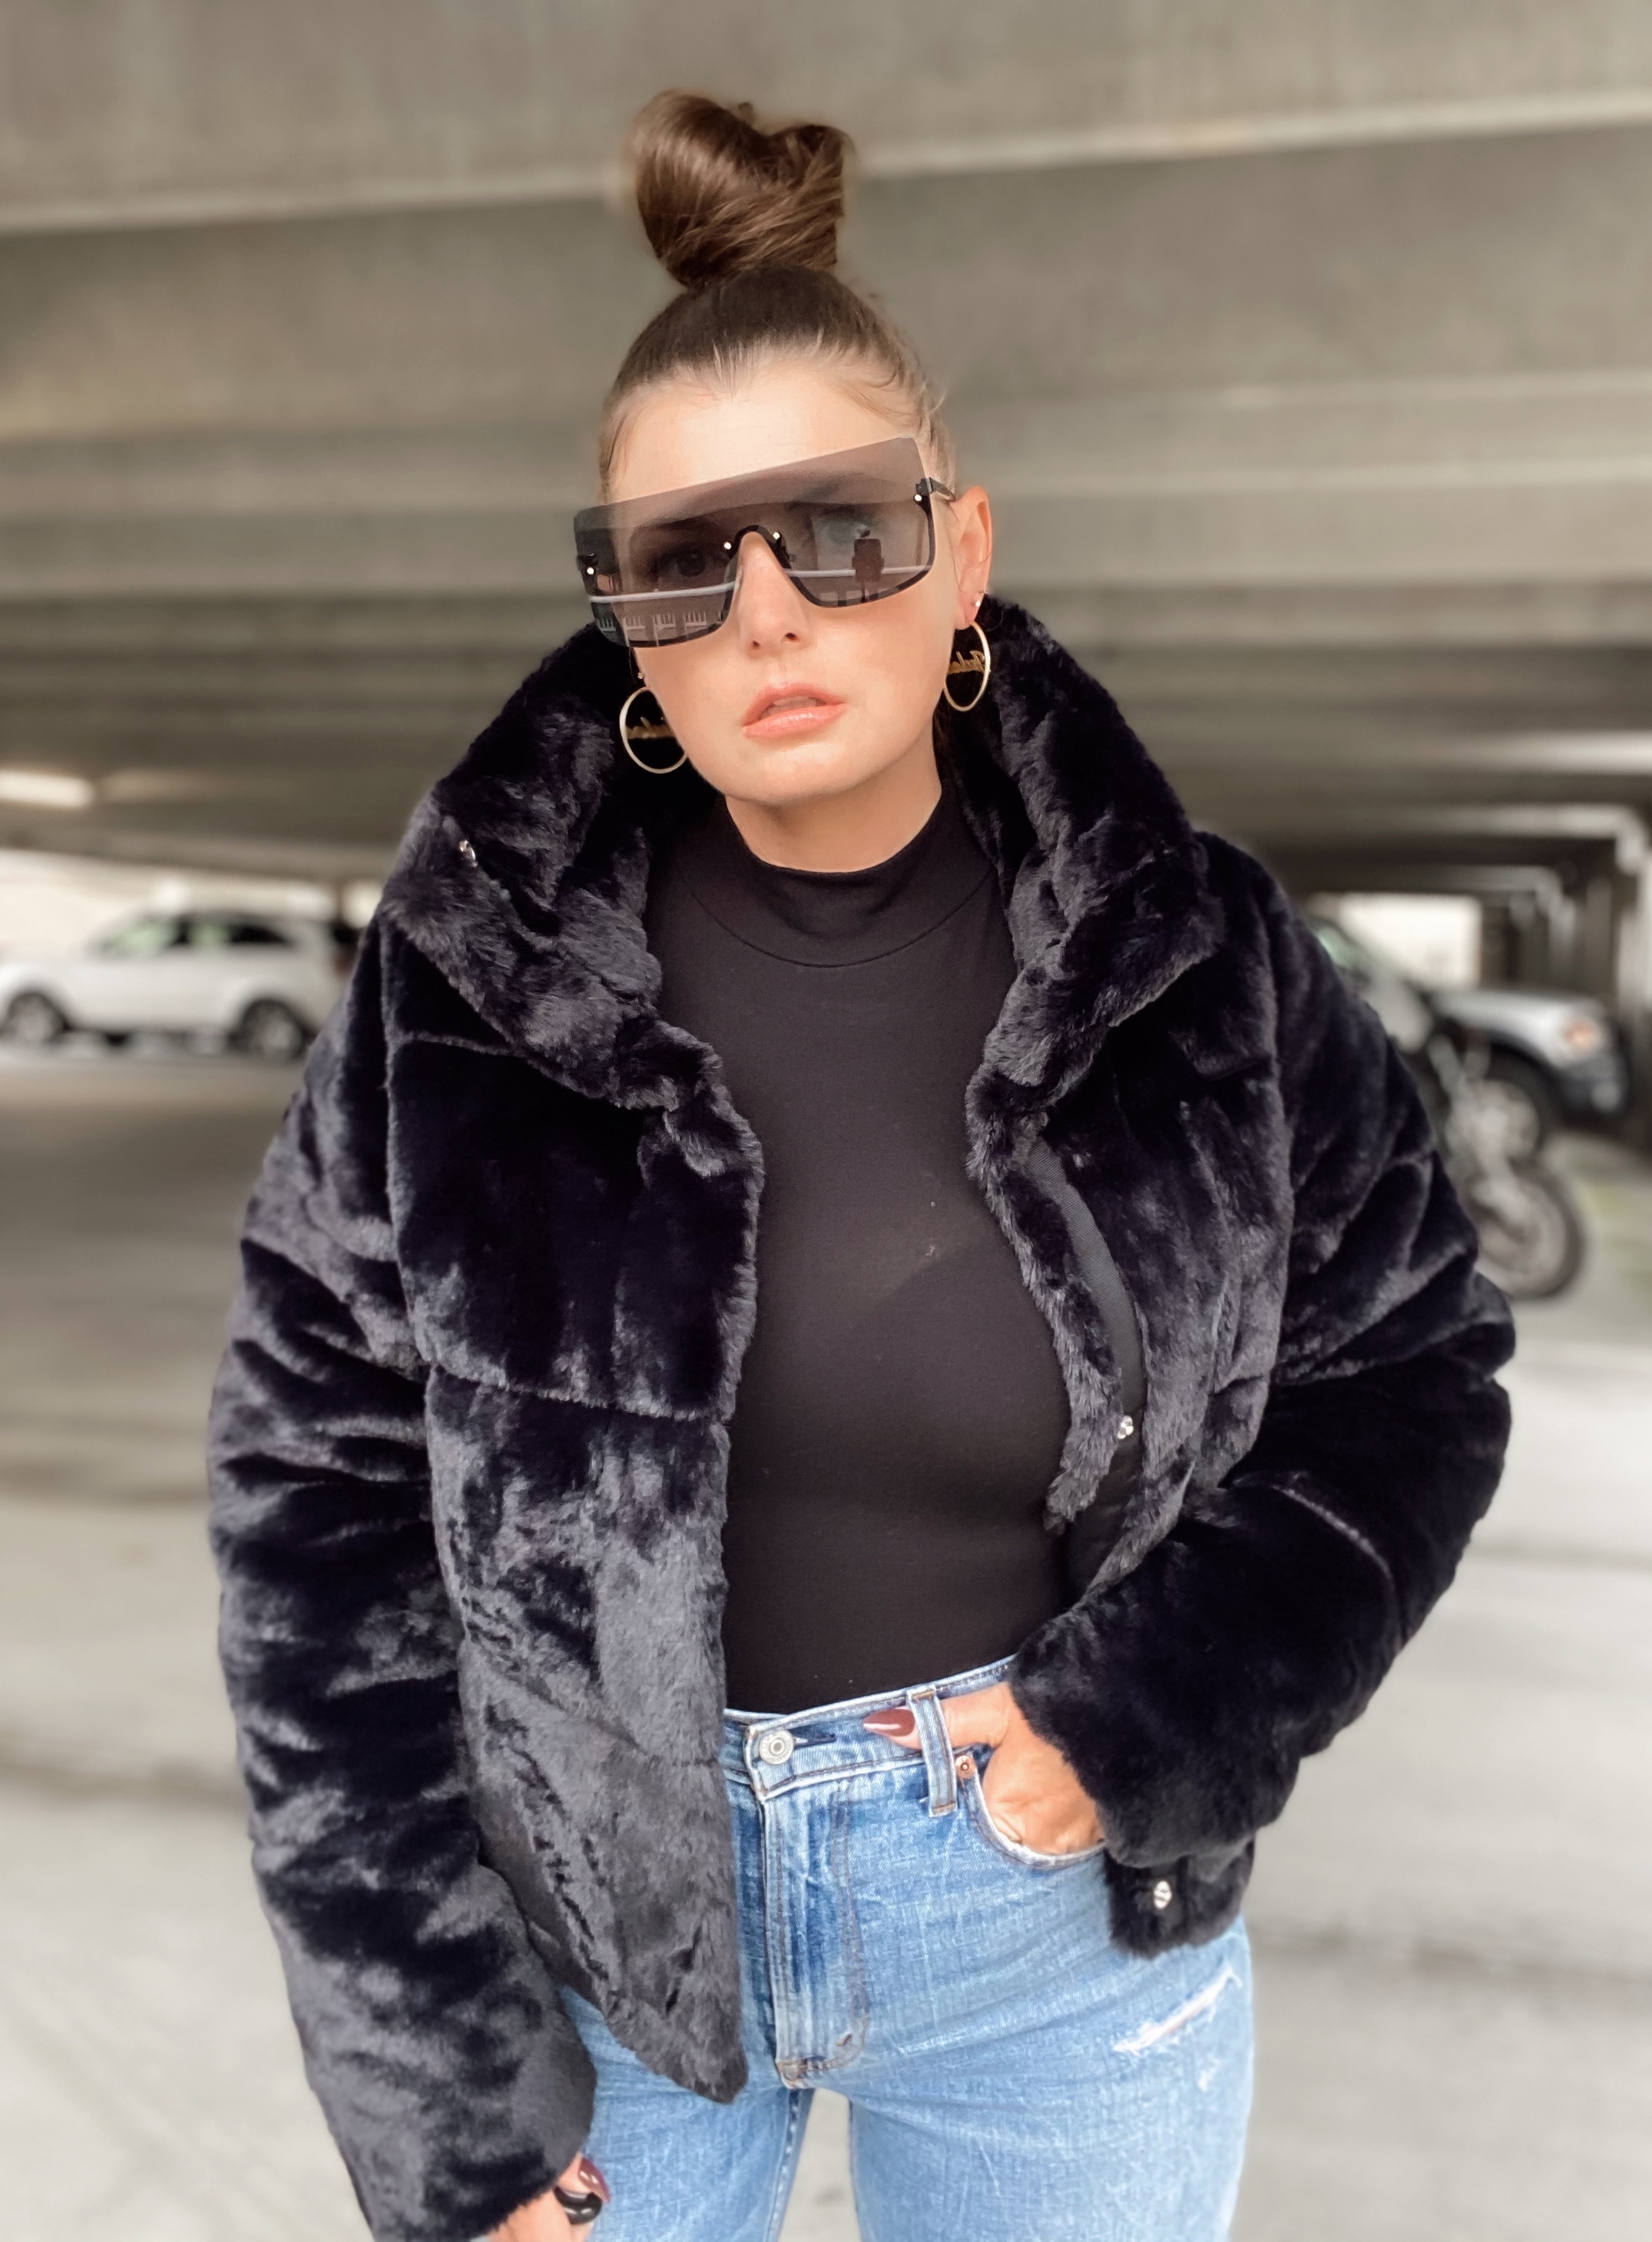 5 FALL OUTFIT IDEAS, TOP 5 FROM TIKTOK & IG REELS